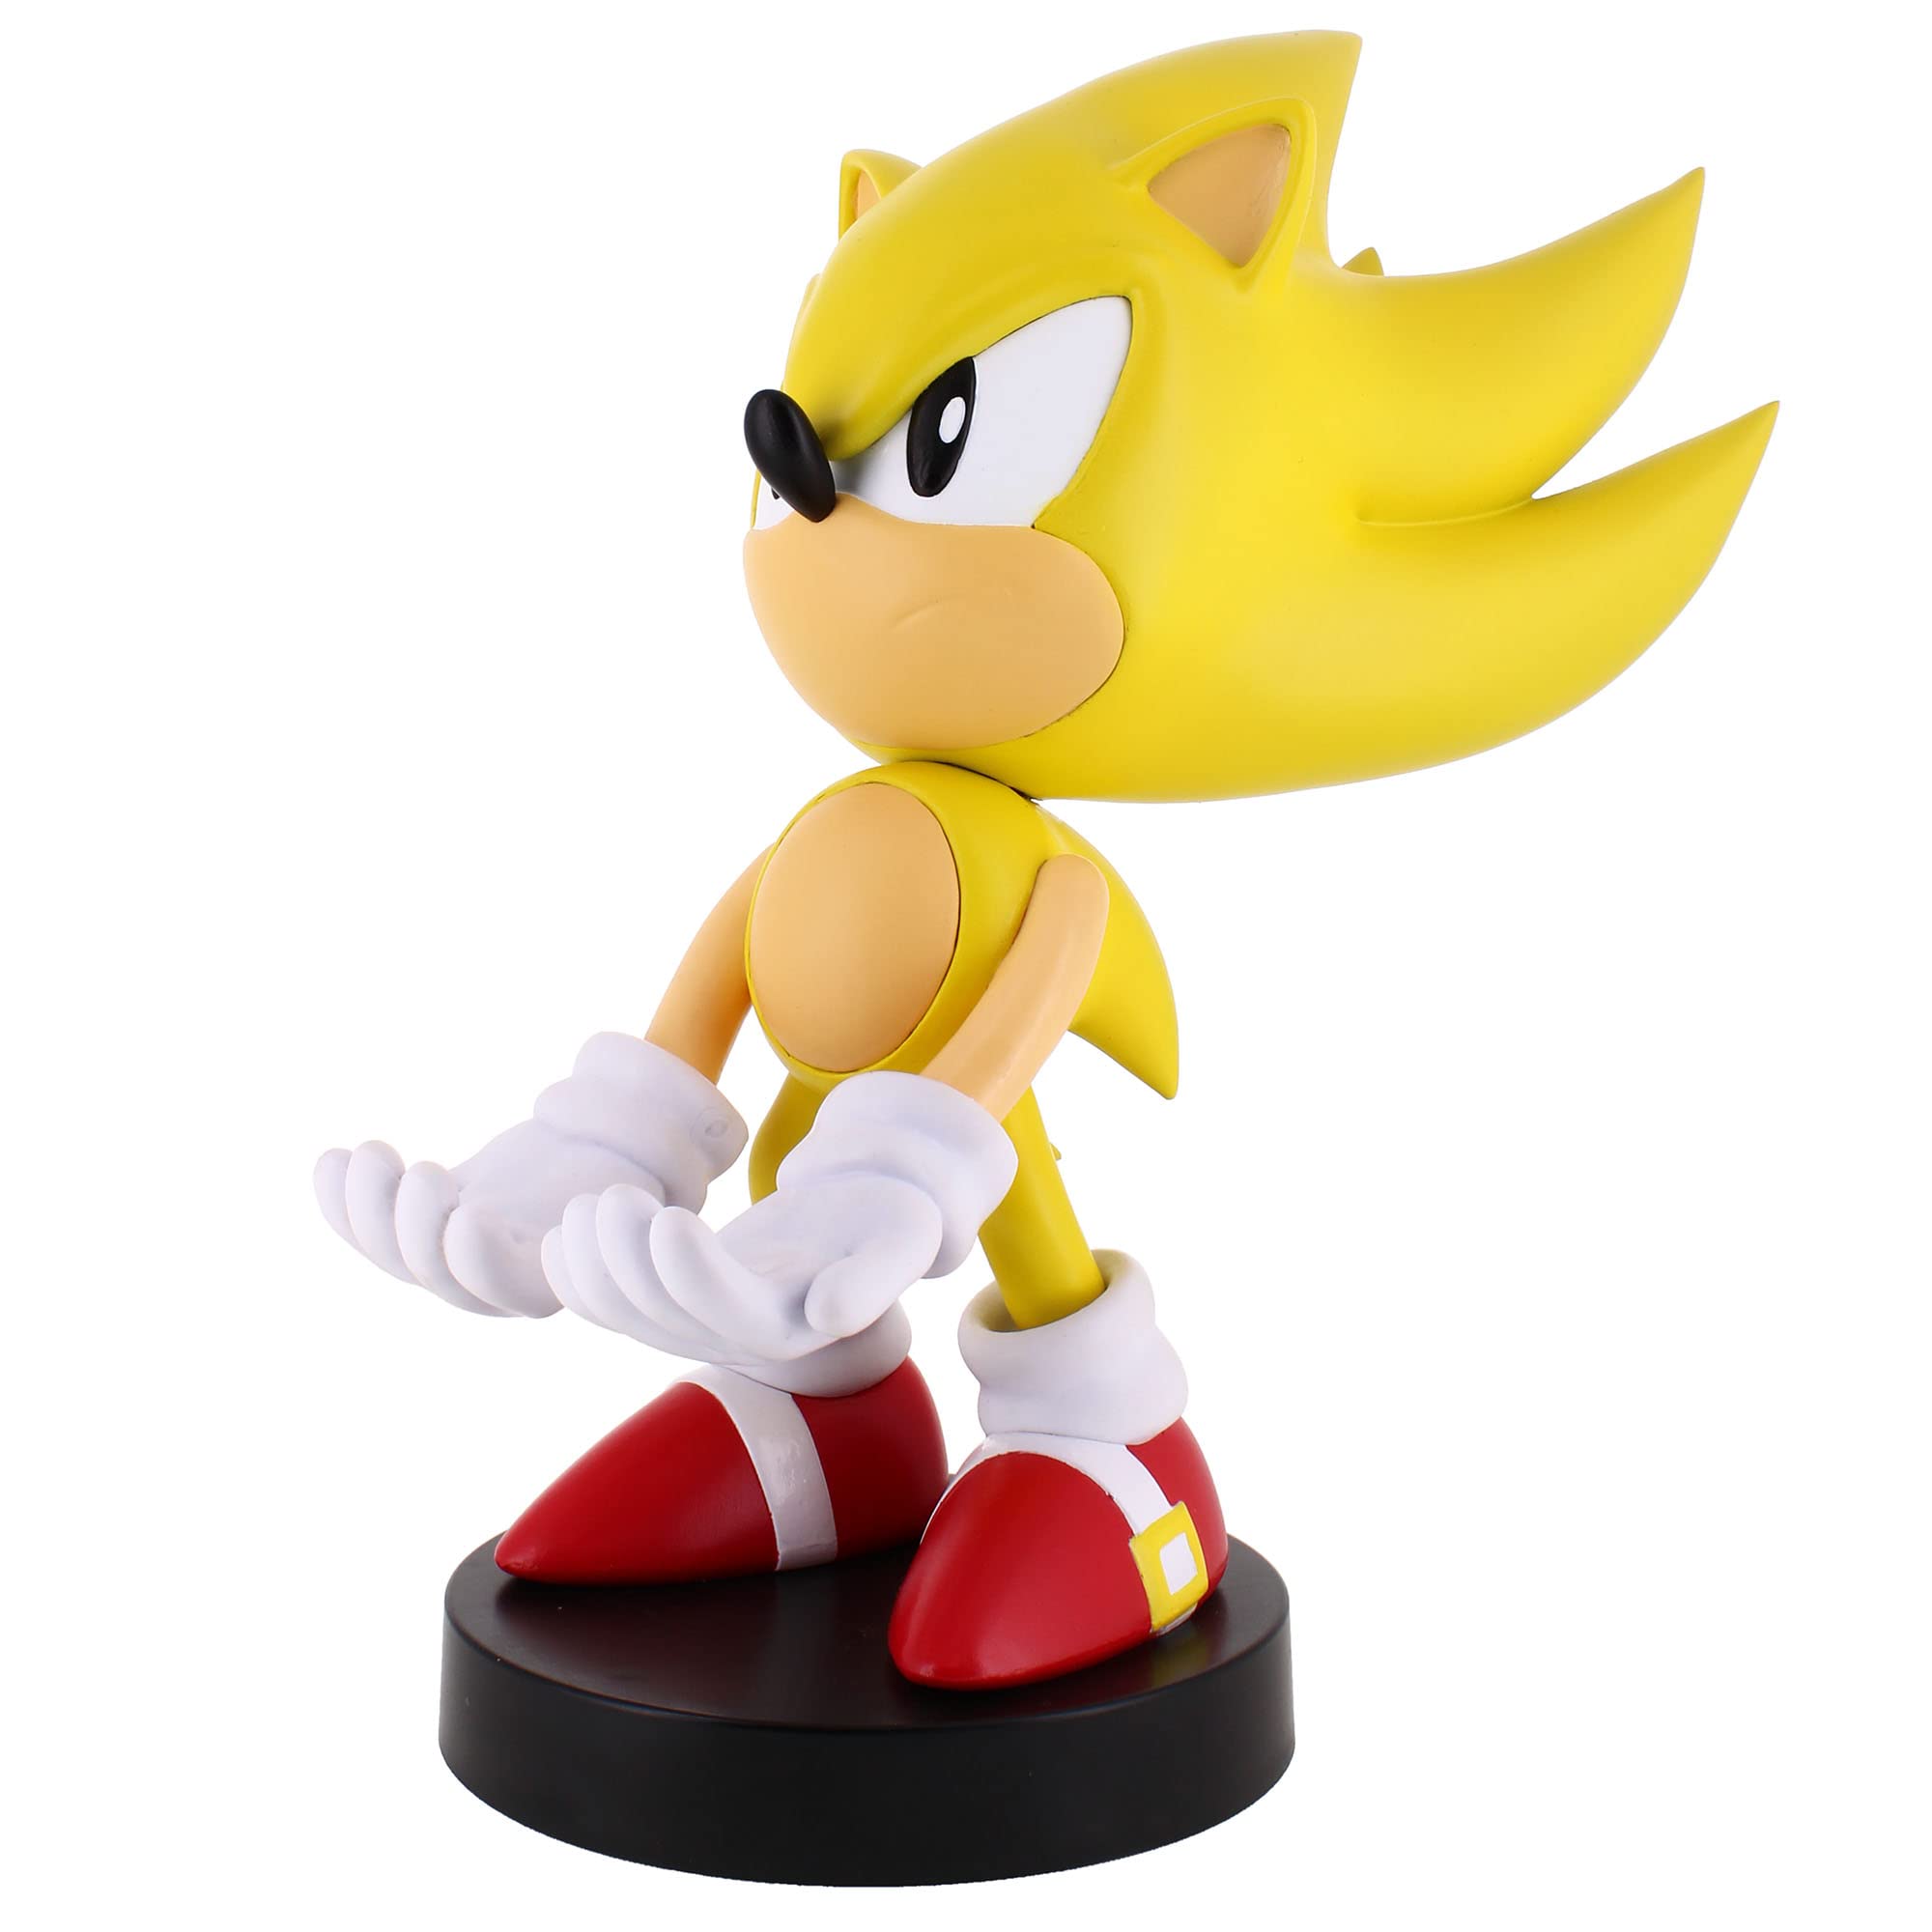 Exquisite Gaming Cable Guy: Phone/Controller Holder - SEGA Super Sonic, Includes a 4 Foot Charging Cable, Heavy Duty PVC Statue and Sturdy Base to Hold Your Stuff without Tipping Over